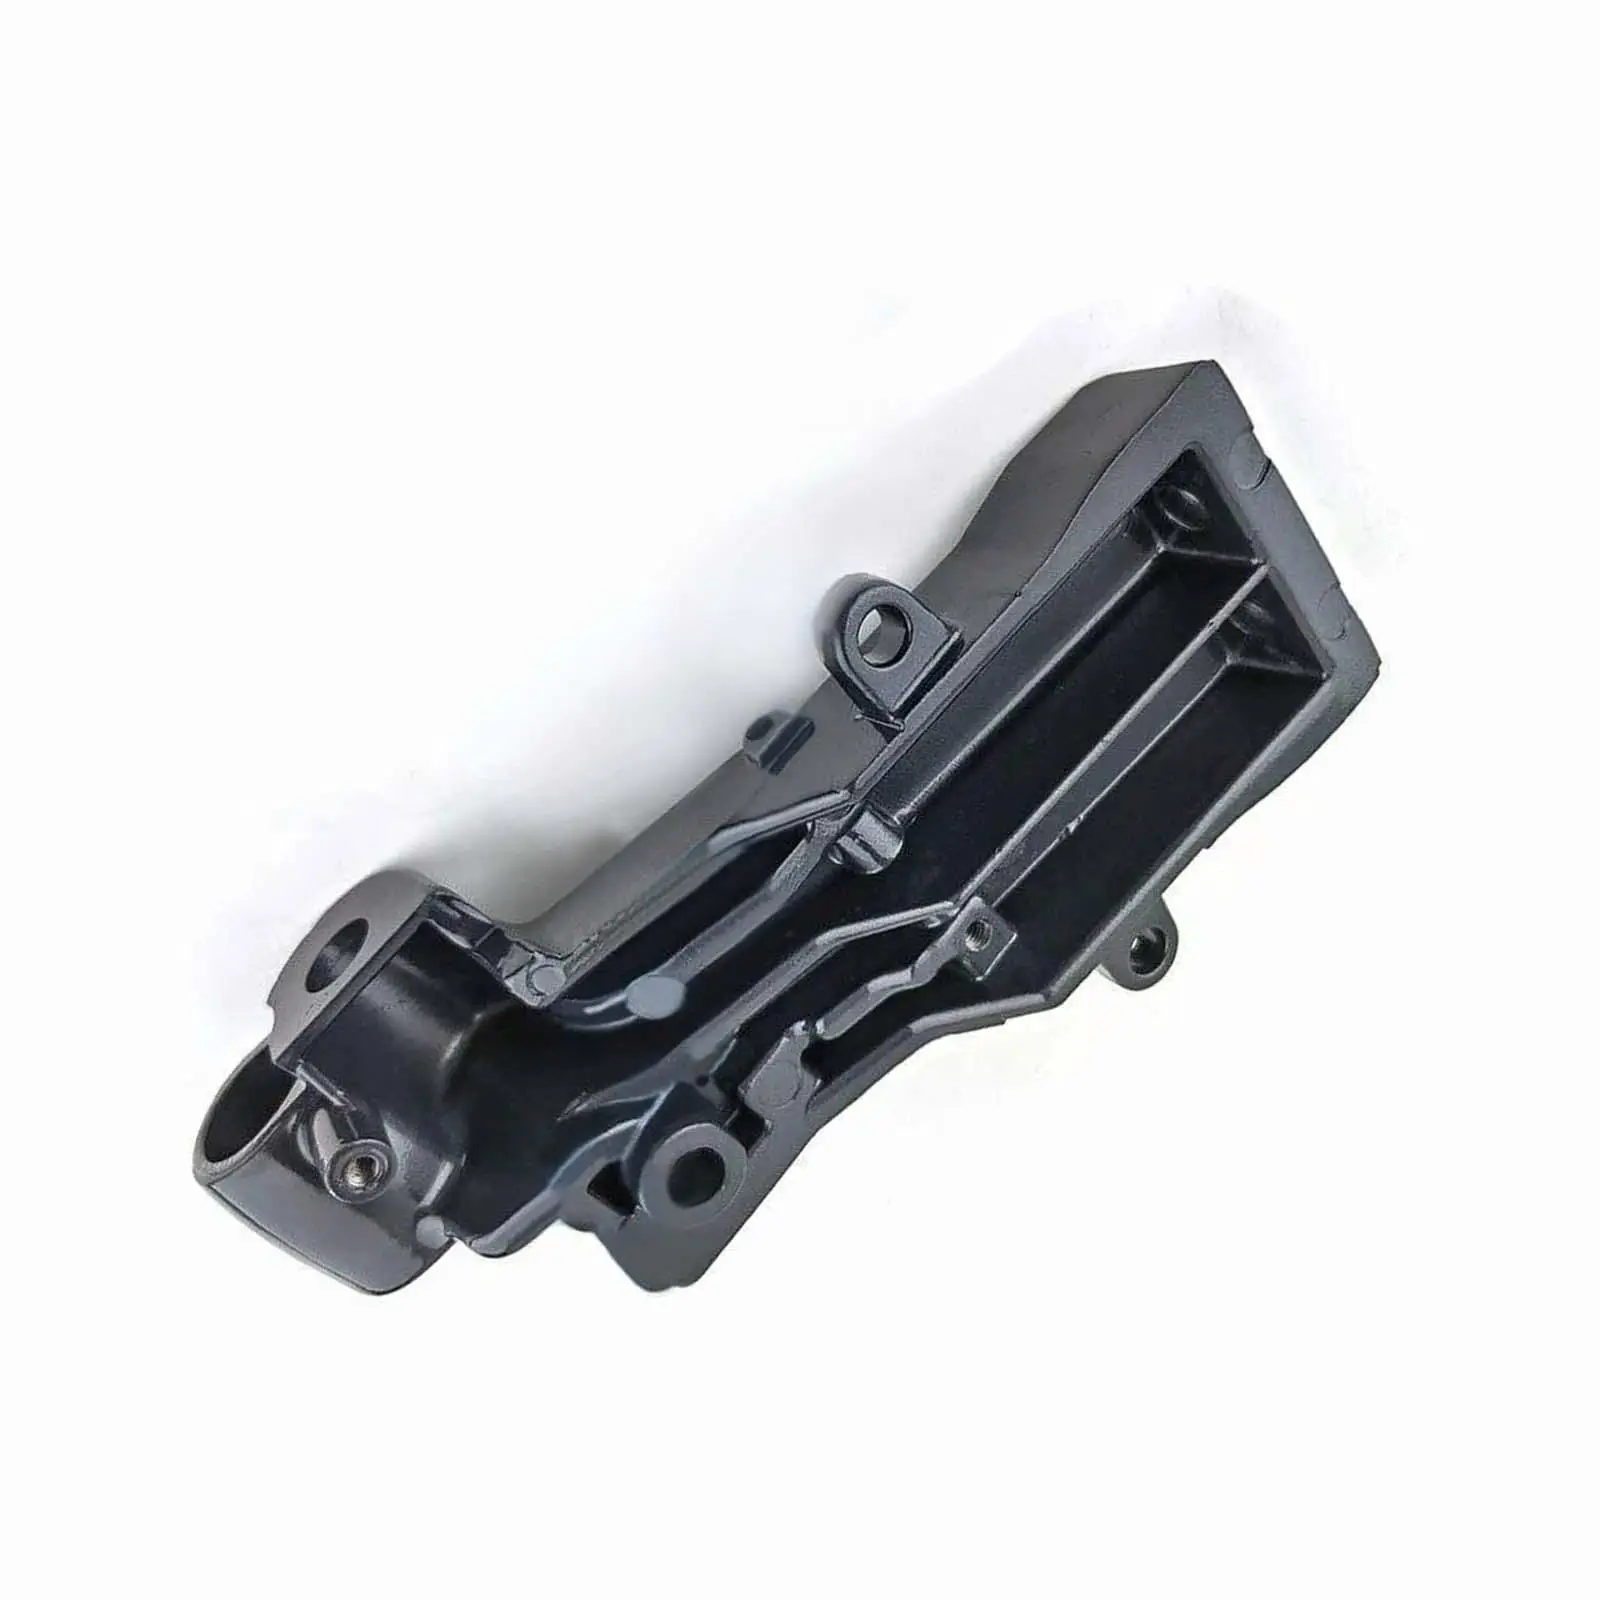 

Outboard Bracket Replace 692-42121-024d 692-42121 Repairing Accessory Easily Install Durable Black